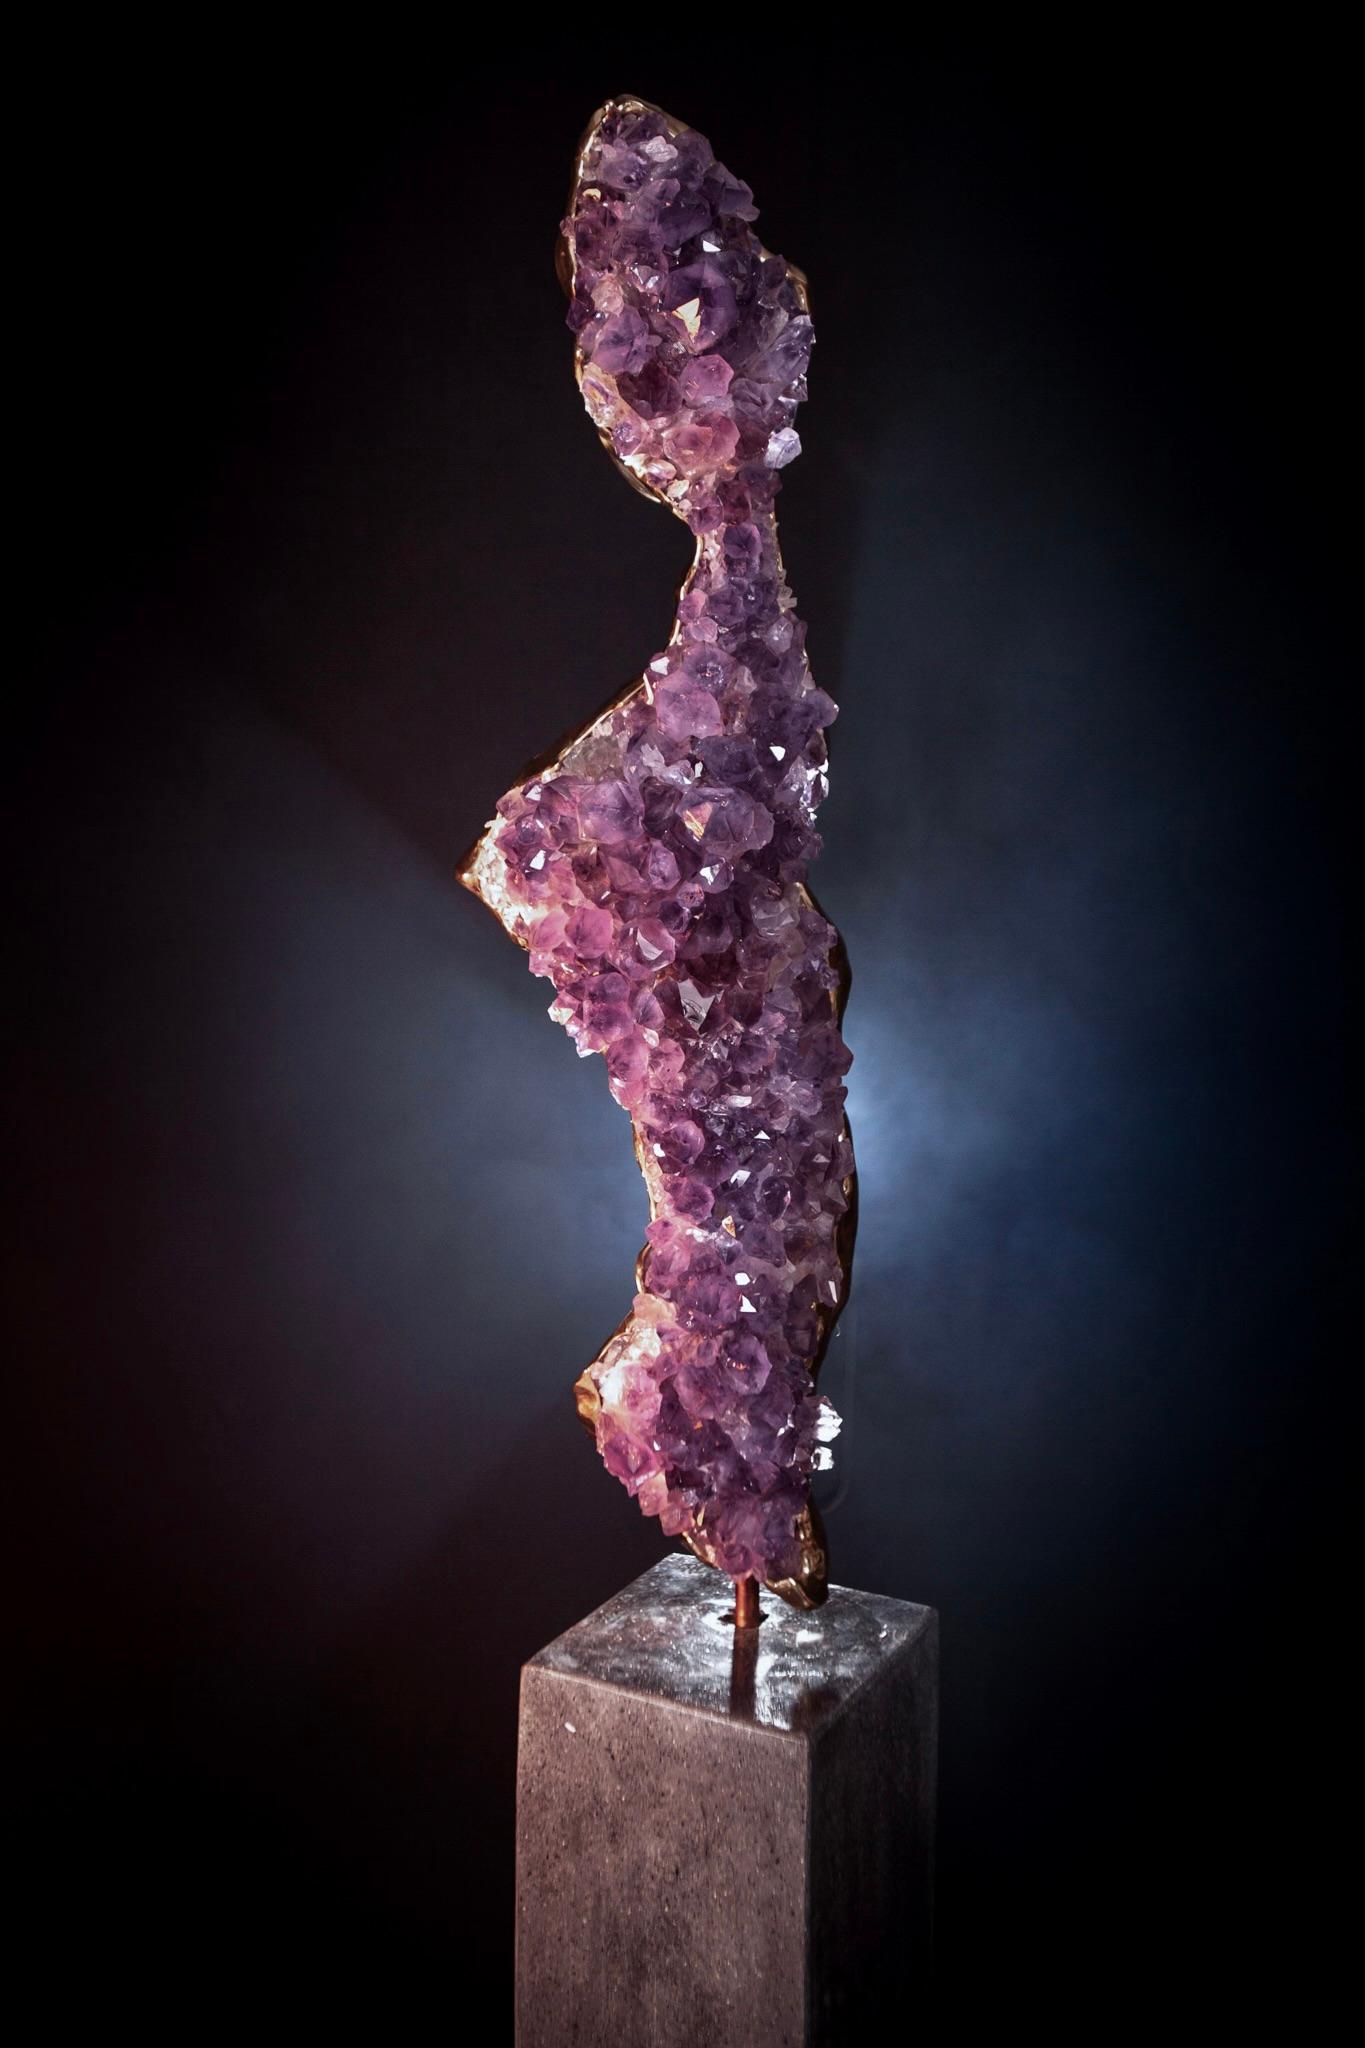 LIMINAL STATE  Amethyst crystals, bronze sculpture - Contemporary Sculpture by James Lomax